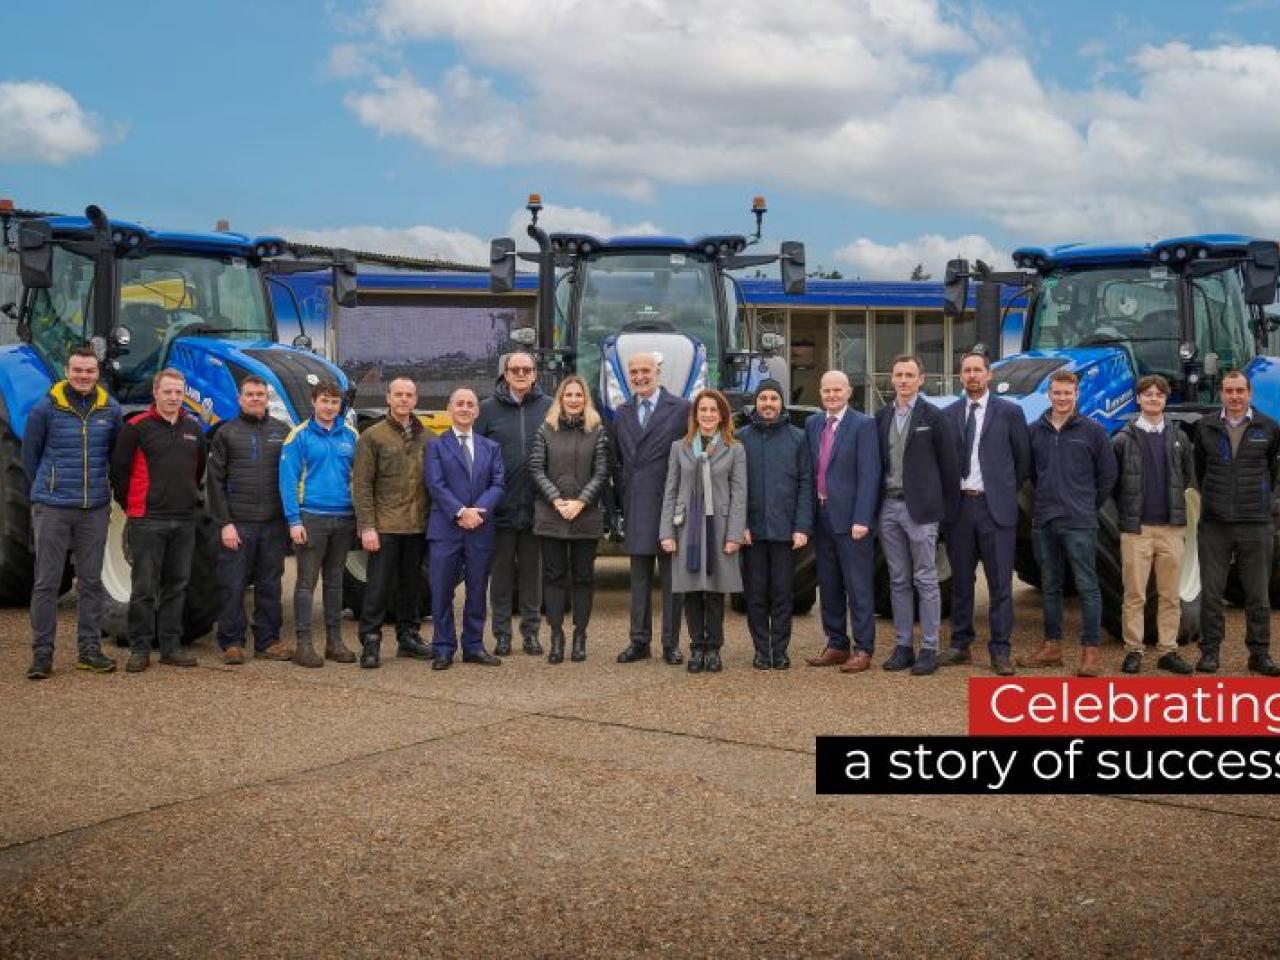 People standing together in front of blue machinery